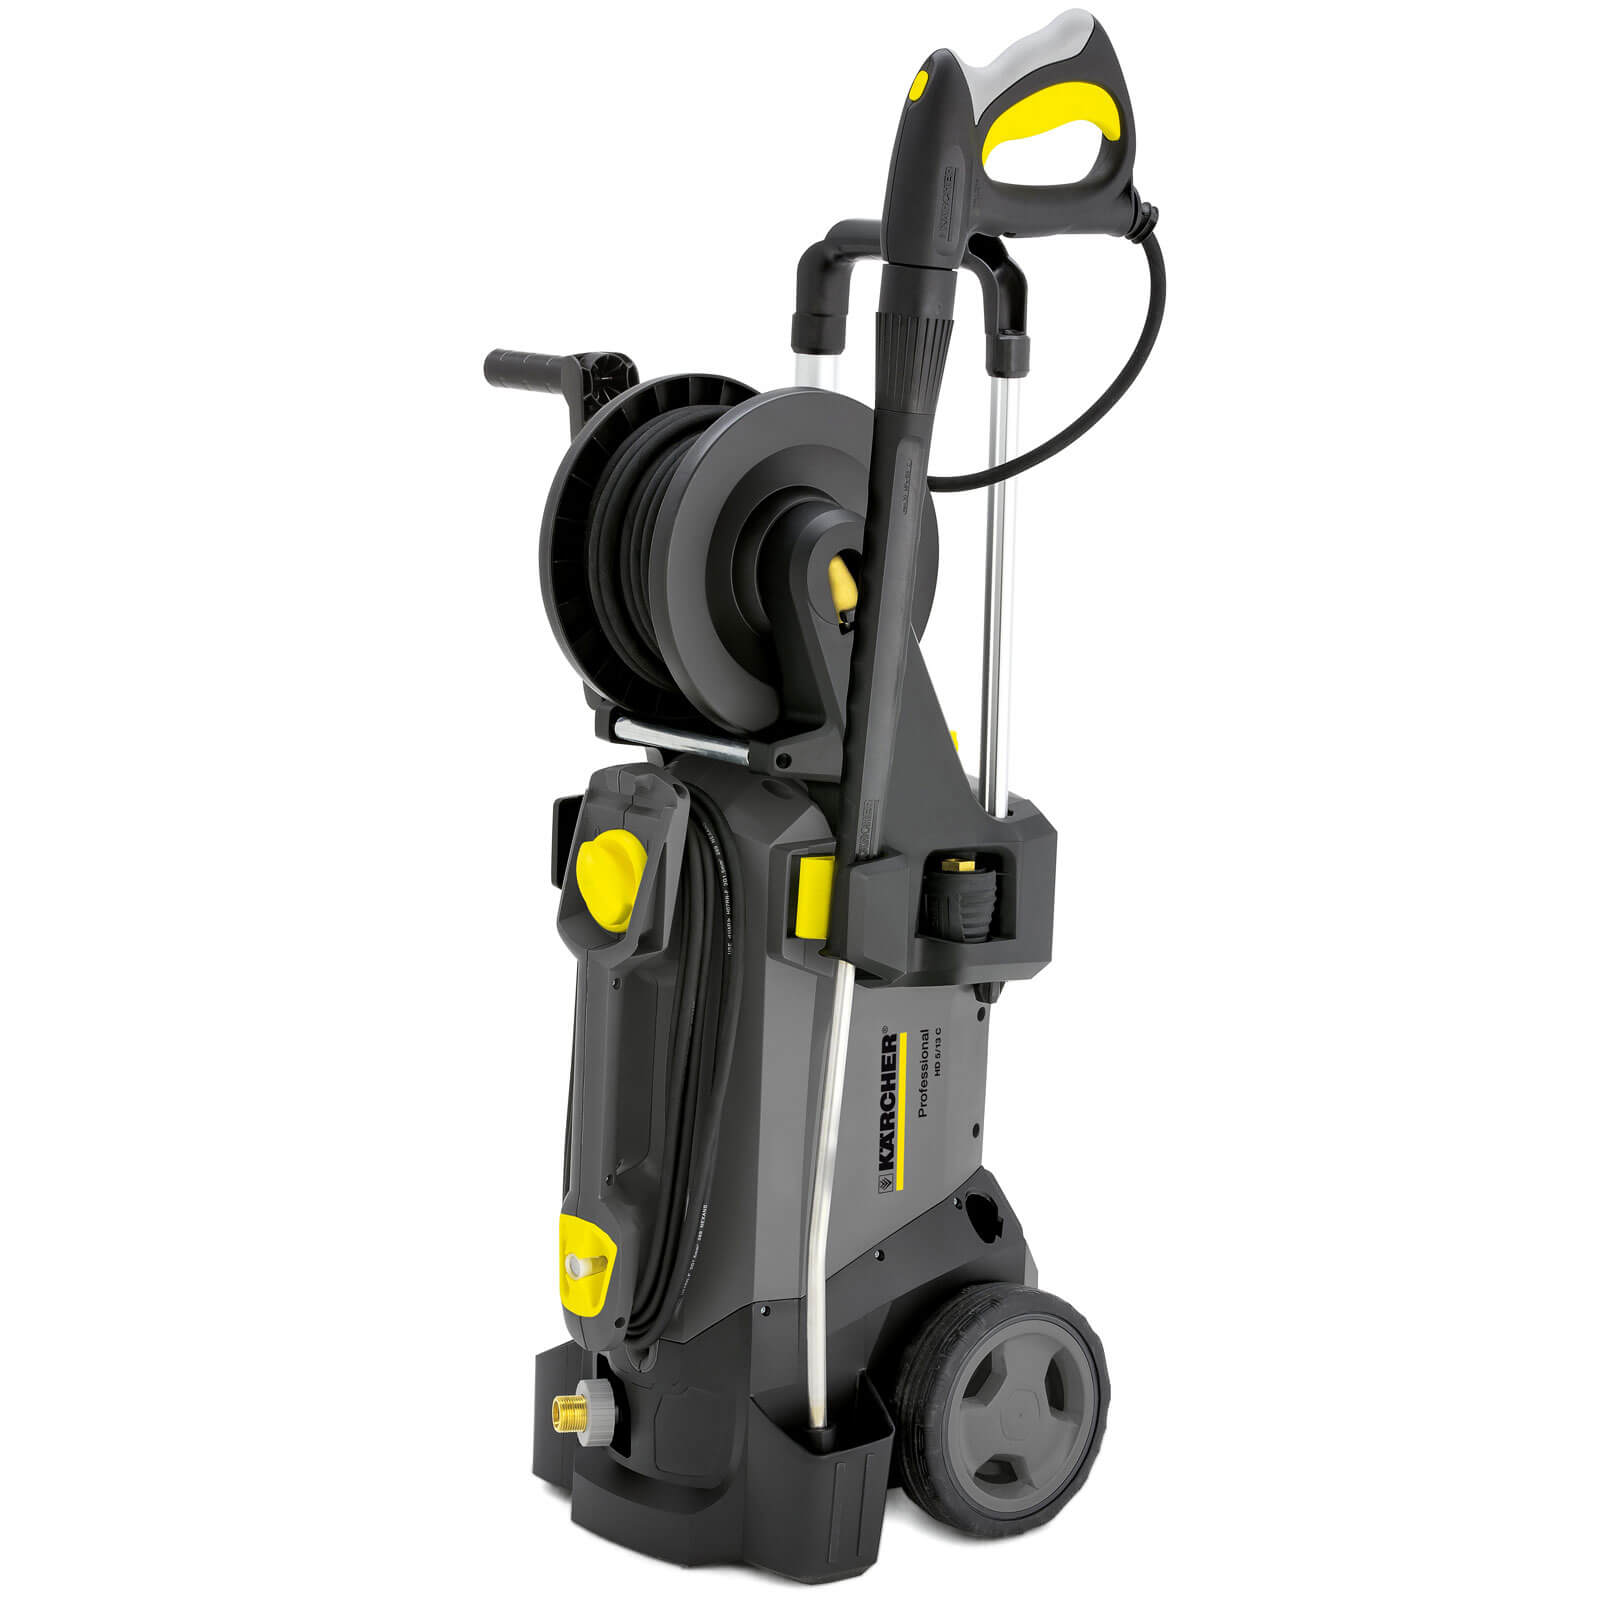 Karcher HD 5/12 CX PLUS Professional Pressure Washer 175 Bar (Not Easy ...